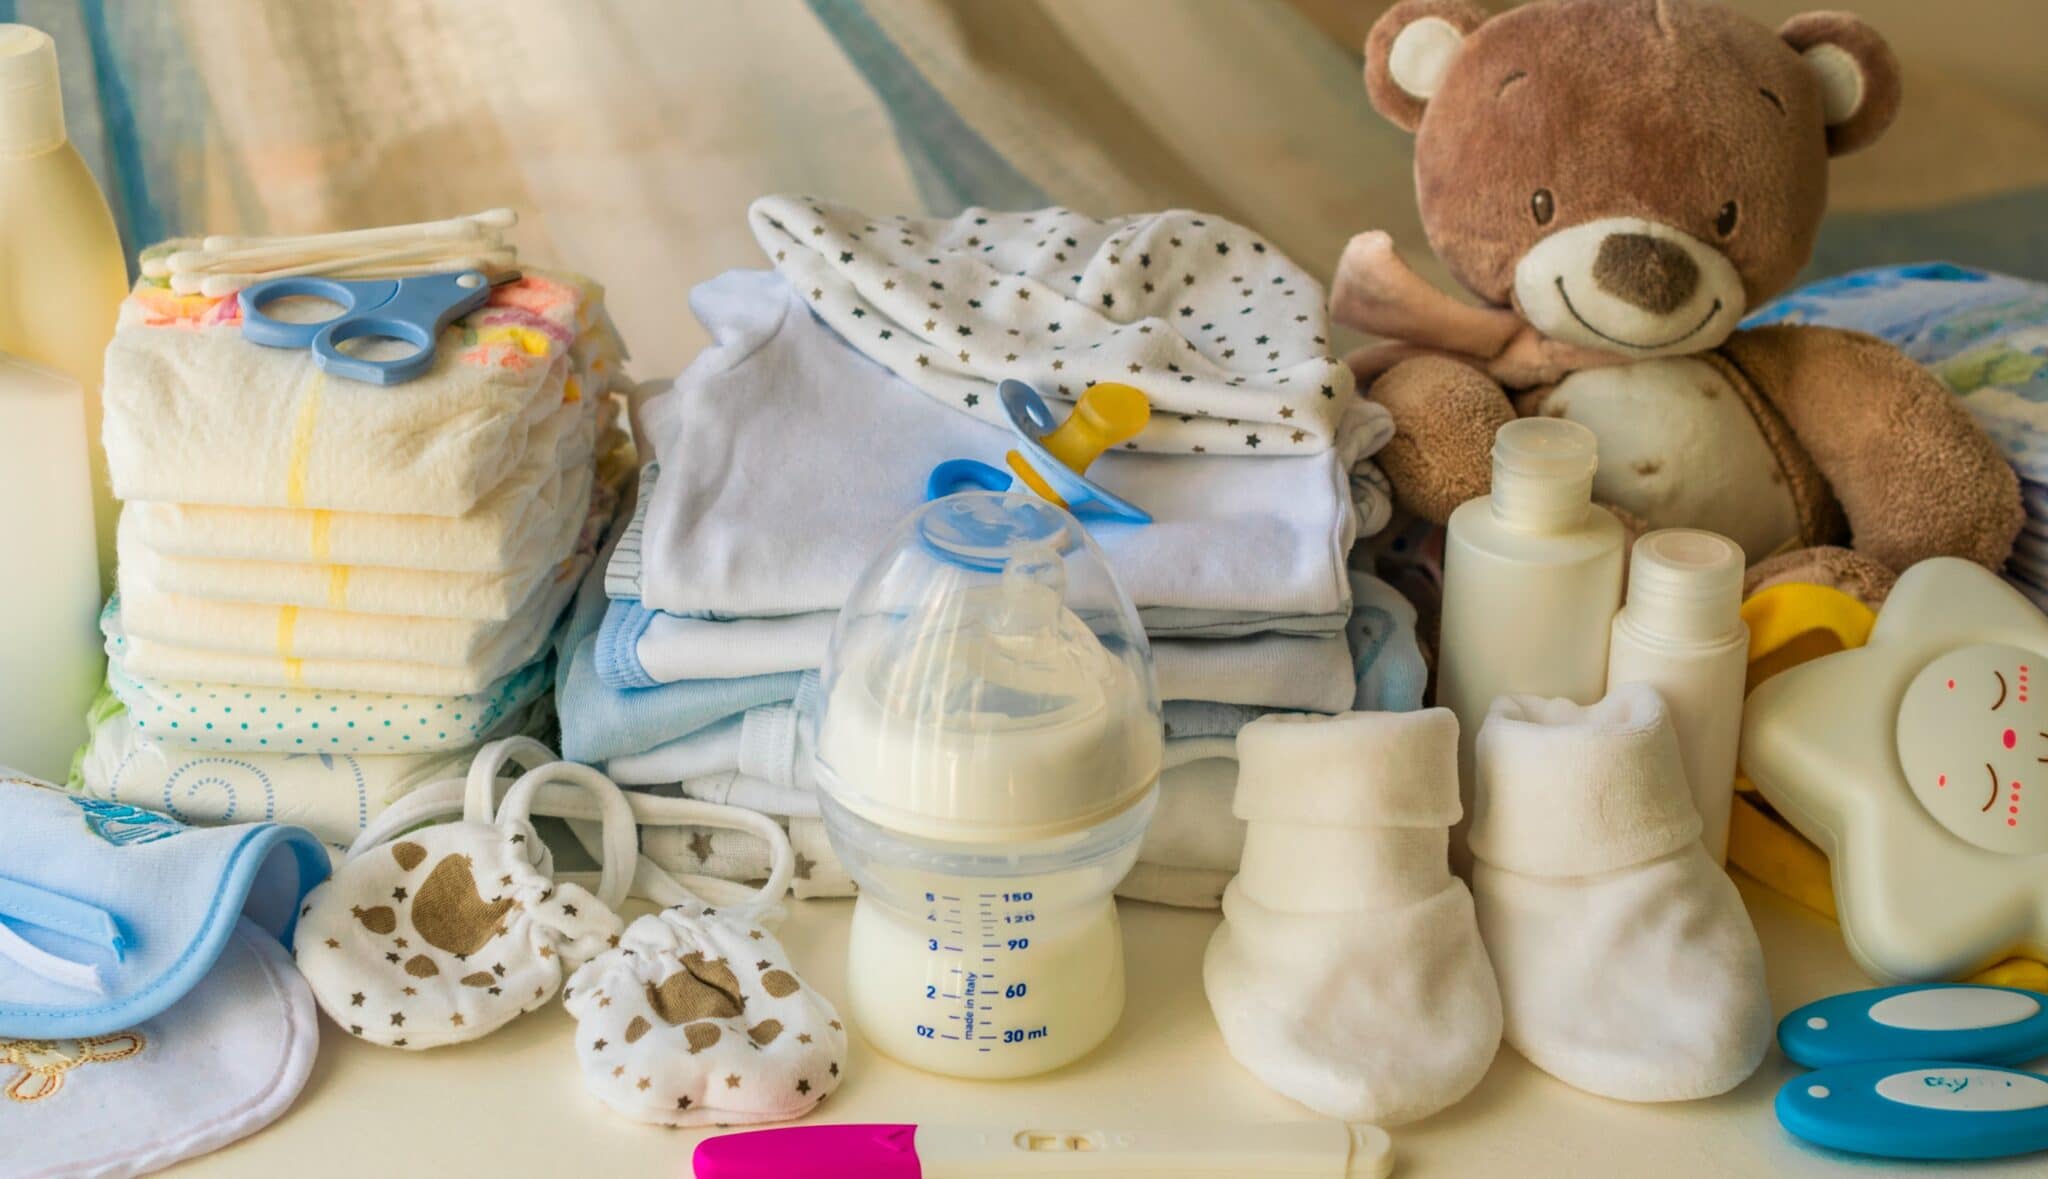 Best Baby Products for New Parents